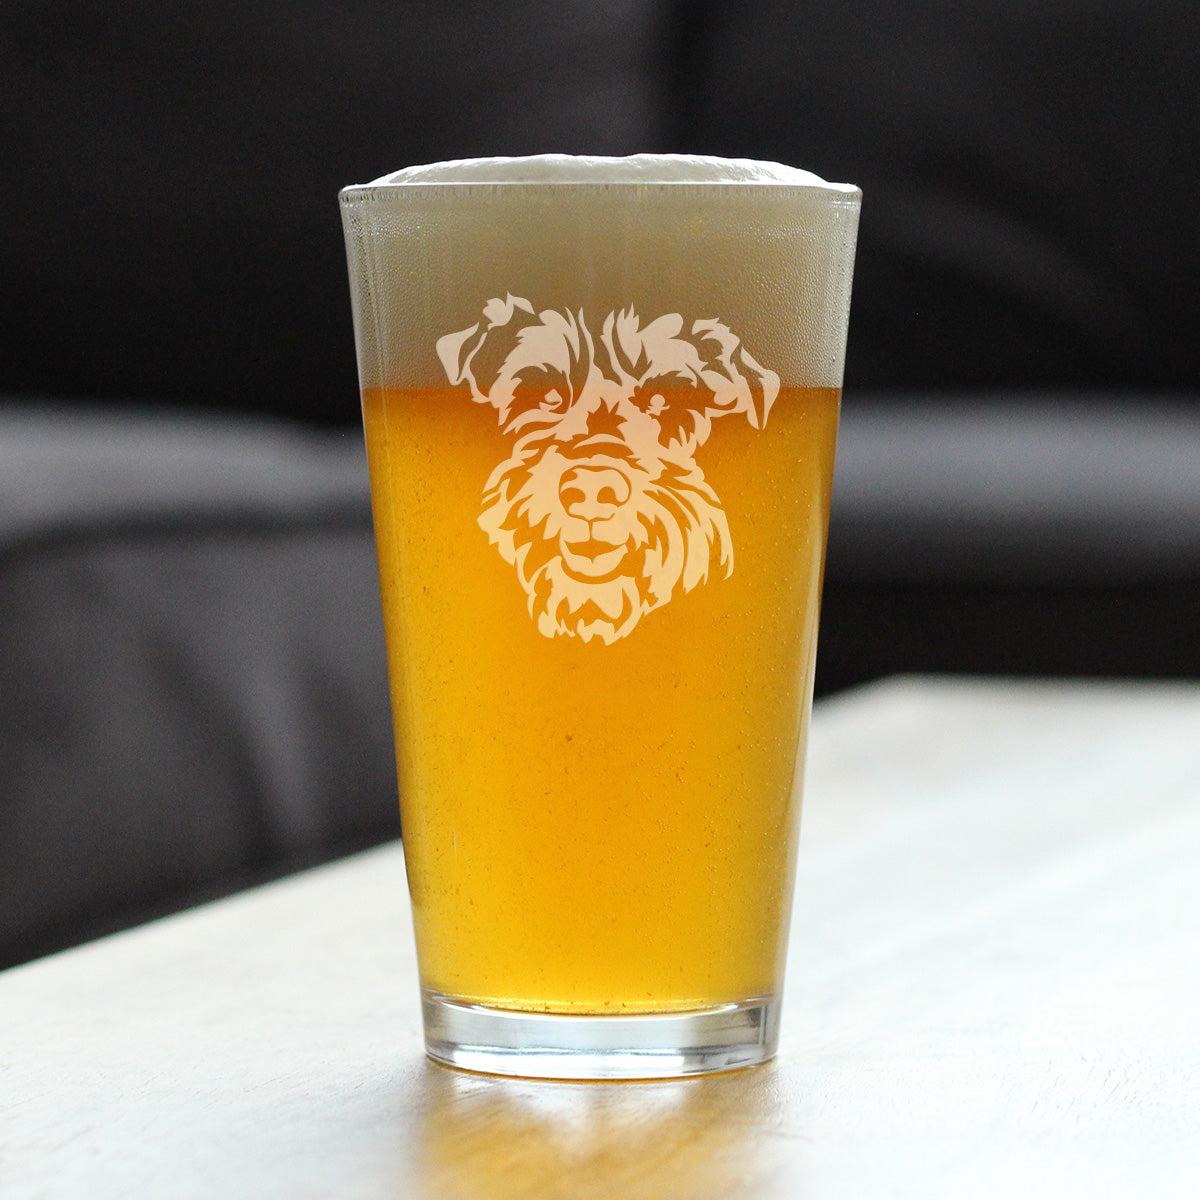 Schnauzer Face Pint Glass for Beer - Unique Dog Themed Decor and Gifts for Moms &amp; Dads of Schnauzers - 16 Oz